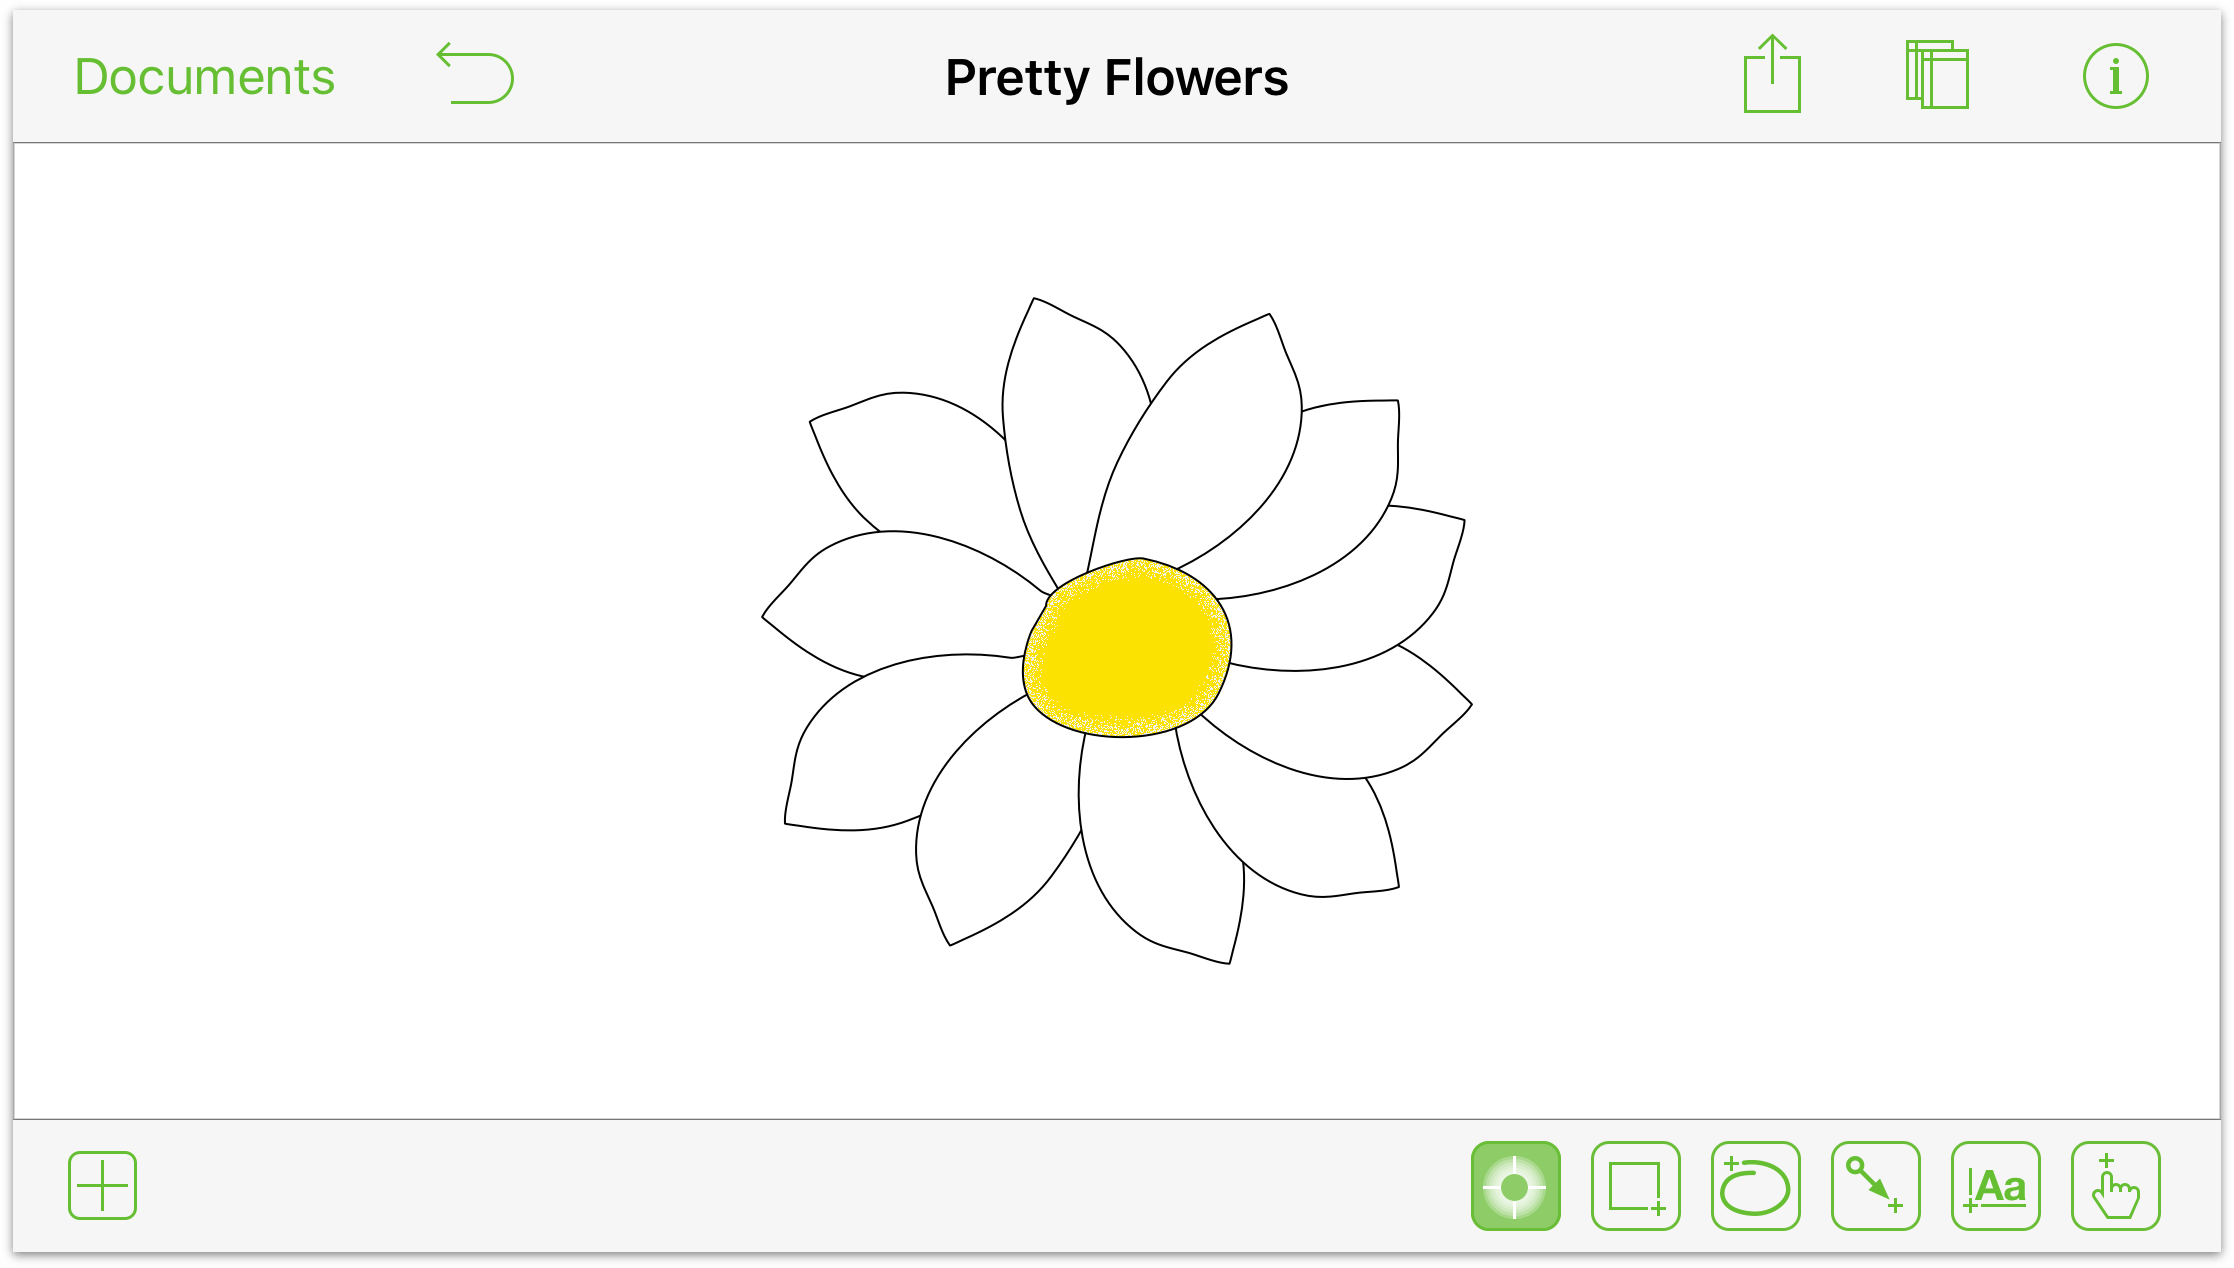 A drawing of a flower, created in OmniGraffle